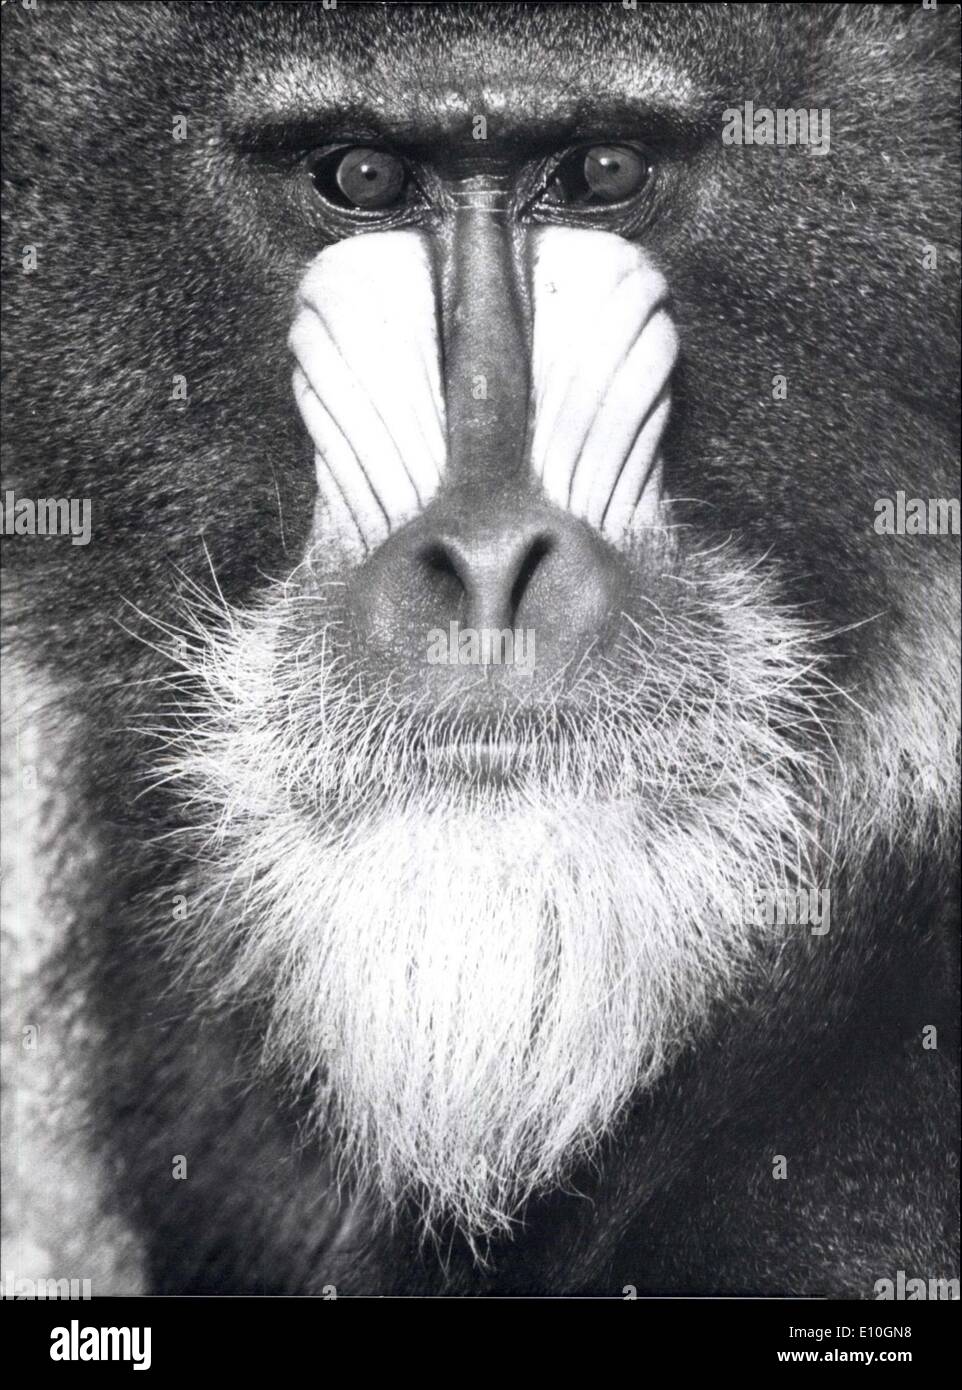 Oct. 31, 1972 - Please Smile The Photographer asked this Mandrill, but he wouldn't oblige with a cheese cake smile. Even a Mandrill with a 'dirty look', as in this portrait, makes an interesting model. The photo was taken at the Stuttgart zoo. Stock Photo